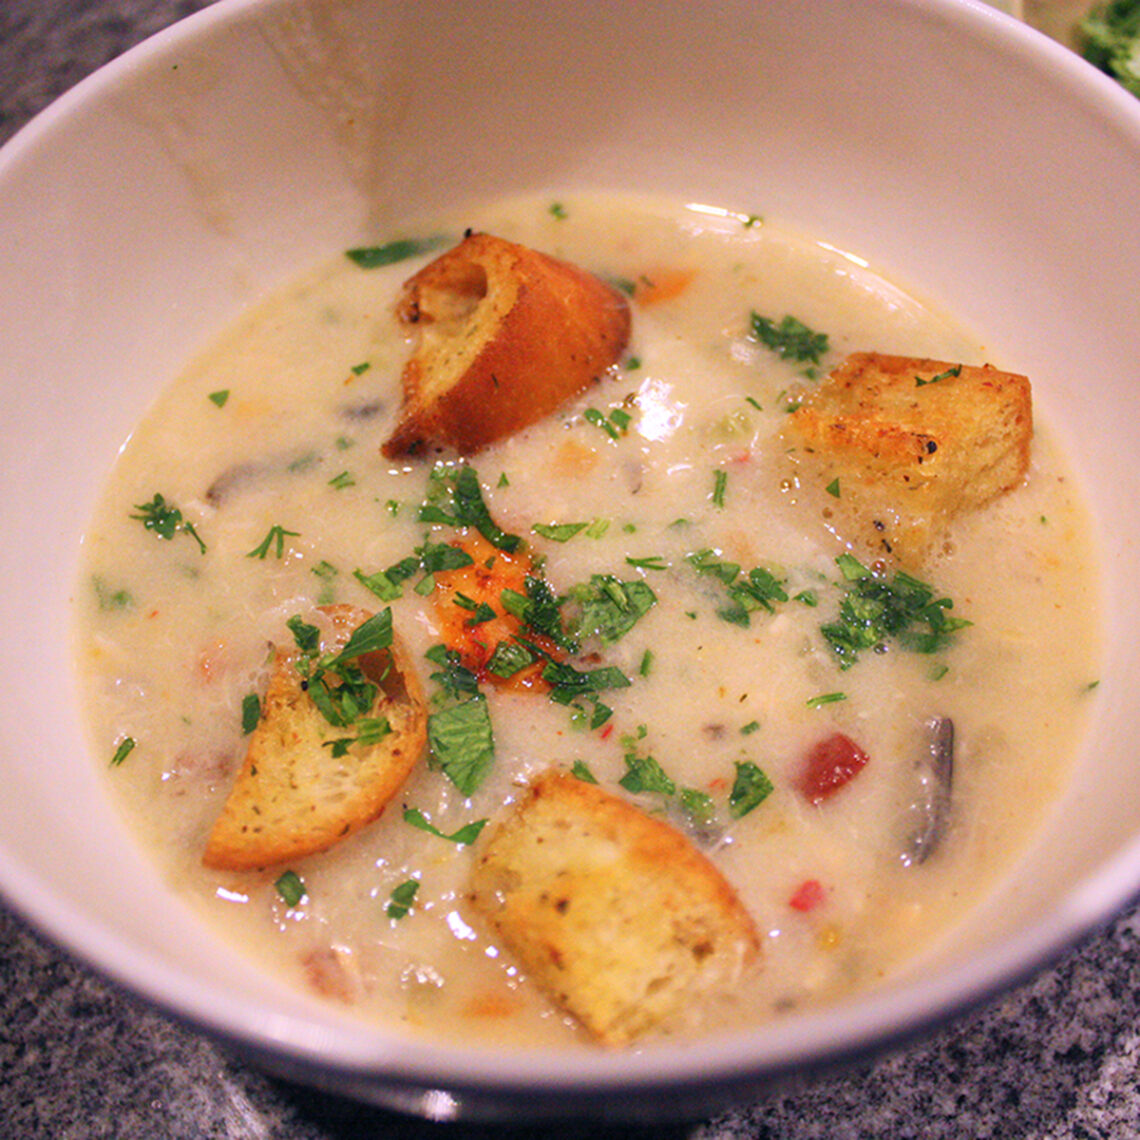 Clam chowder by uncle Gosha. Step by step picture recipes in cooking blog.